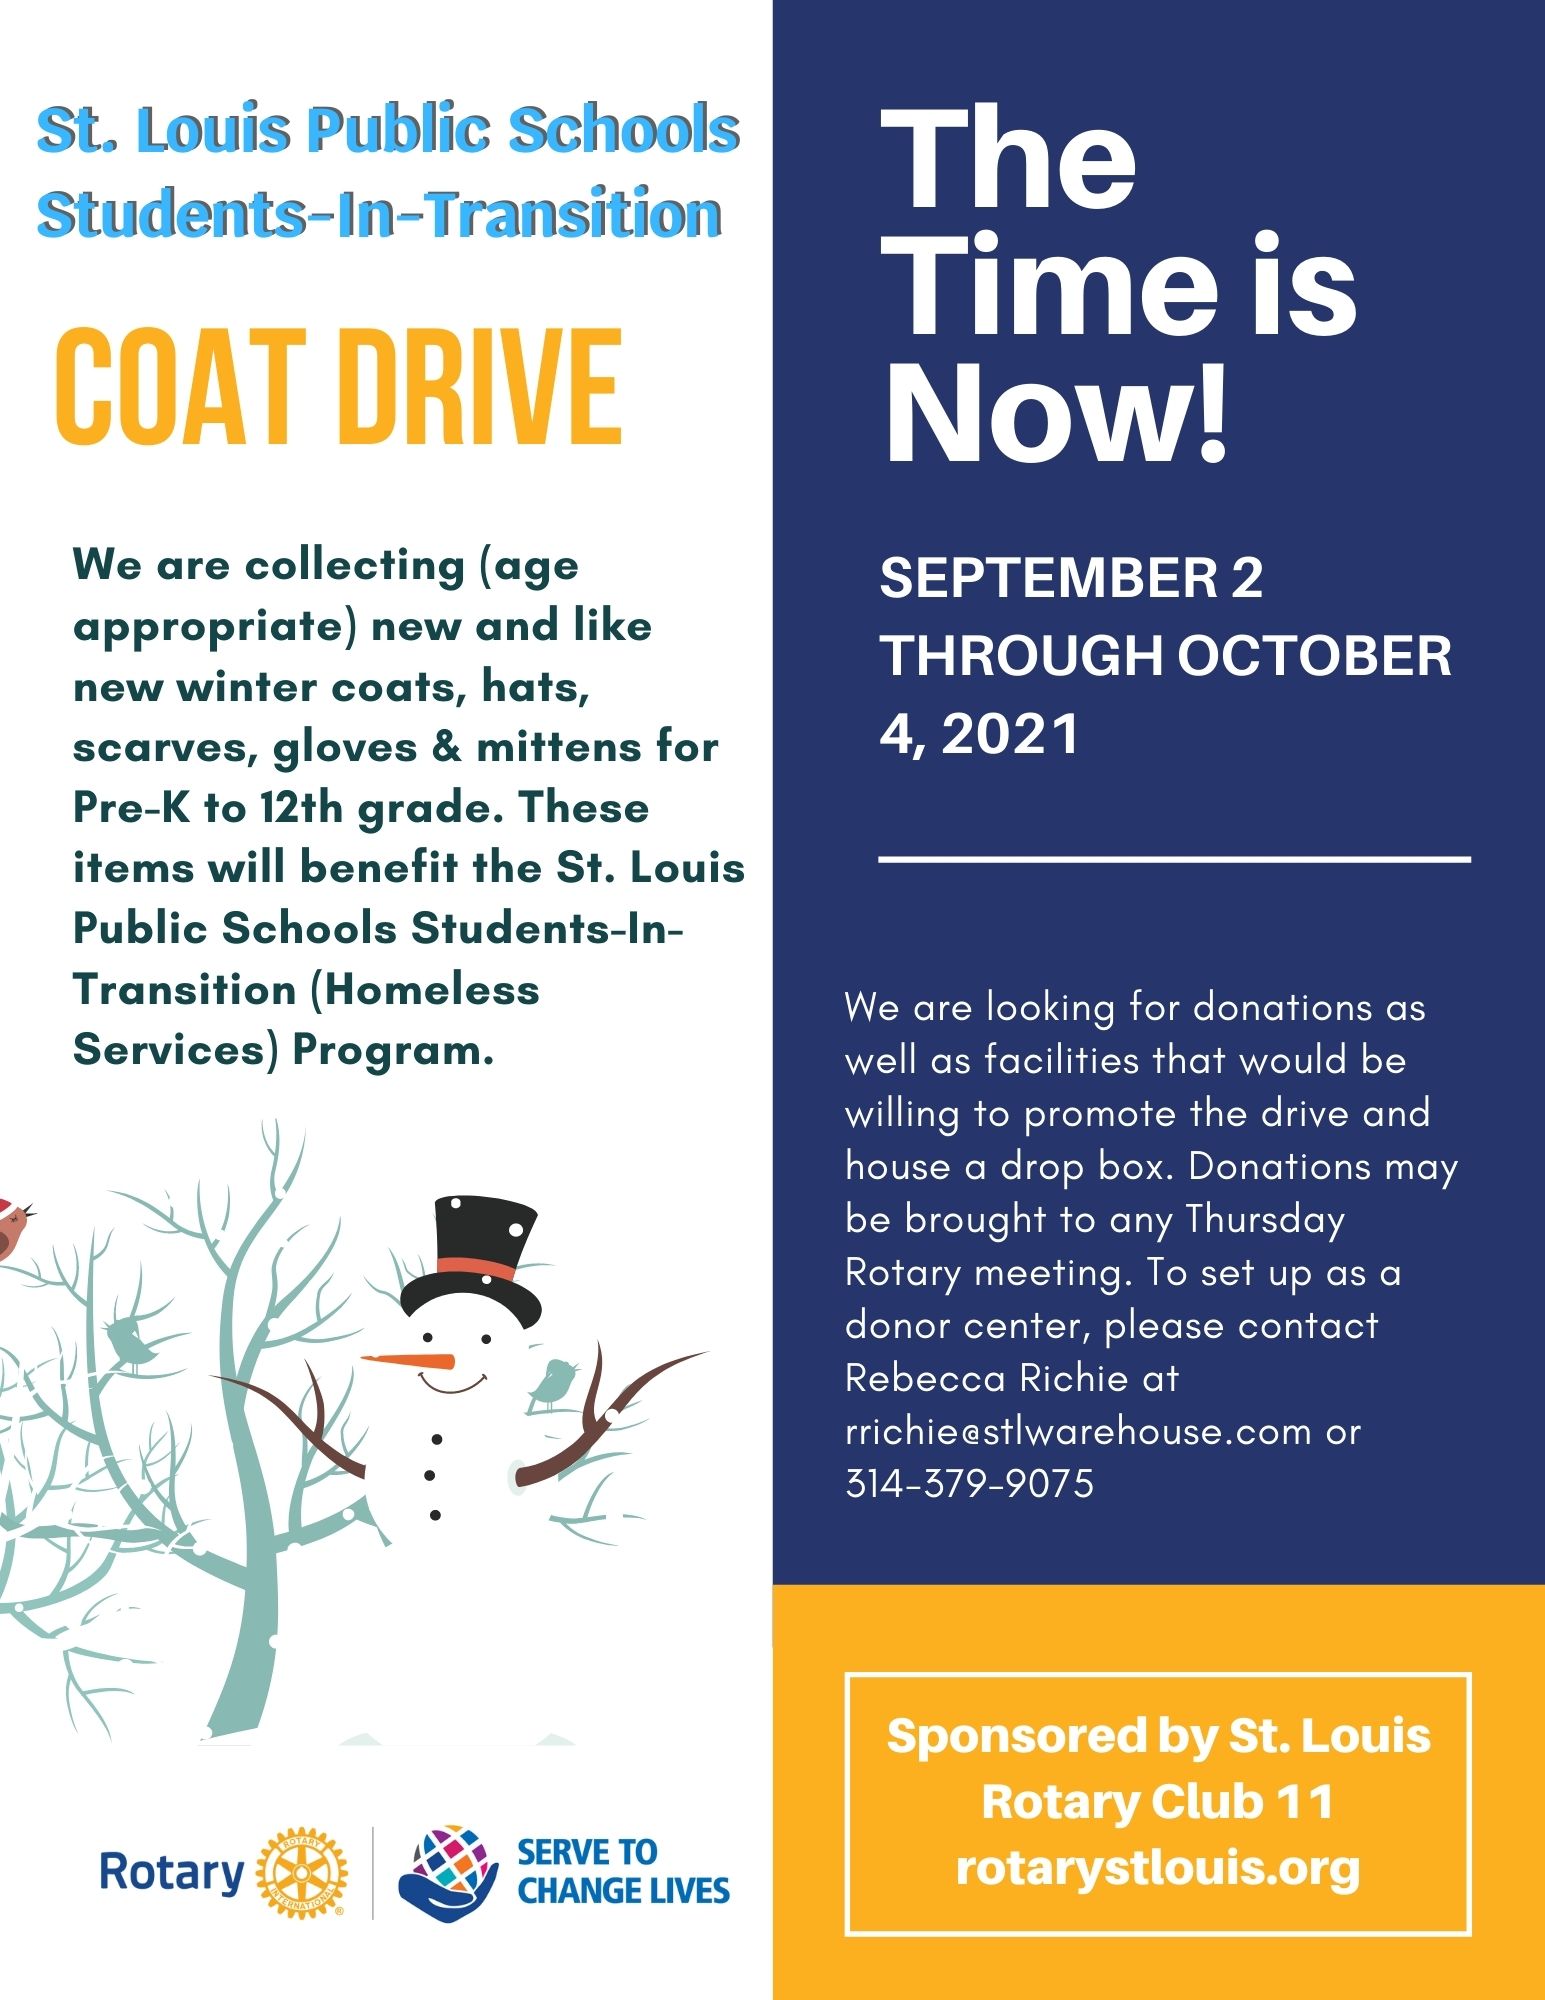 St. Louis Rotary Club is sponsoring a coat drive to benefit the St. Louis Public Schools Students-In-Transition (Homeless Services) Program.